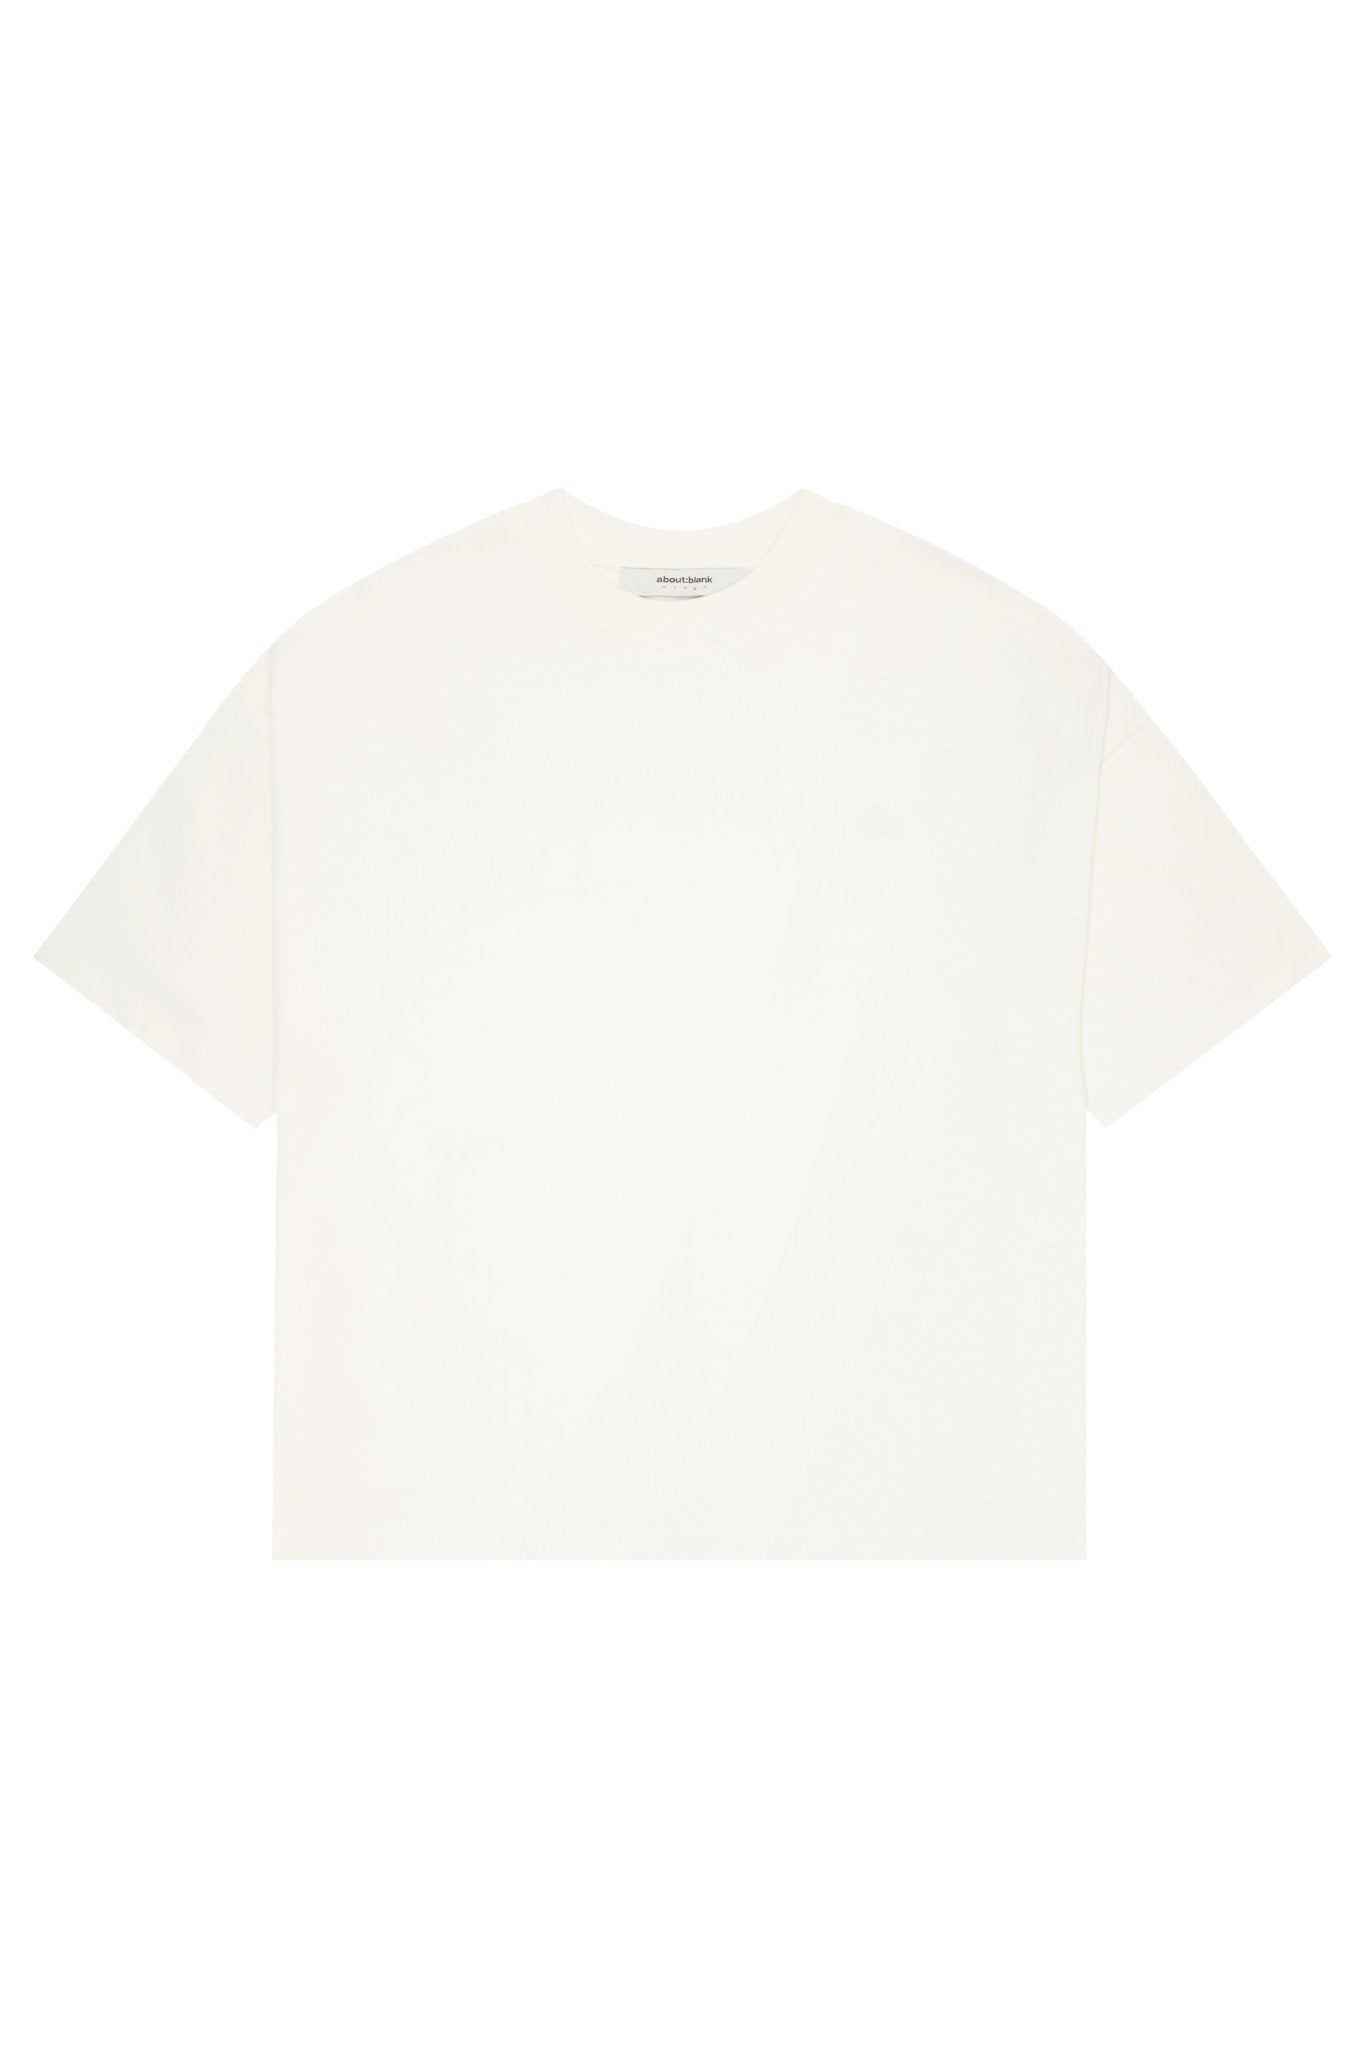 about:blank | oversized t-shirts